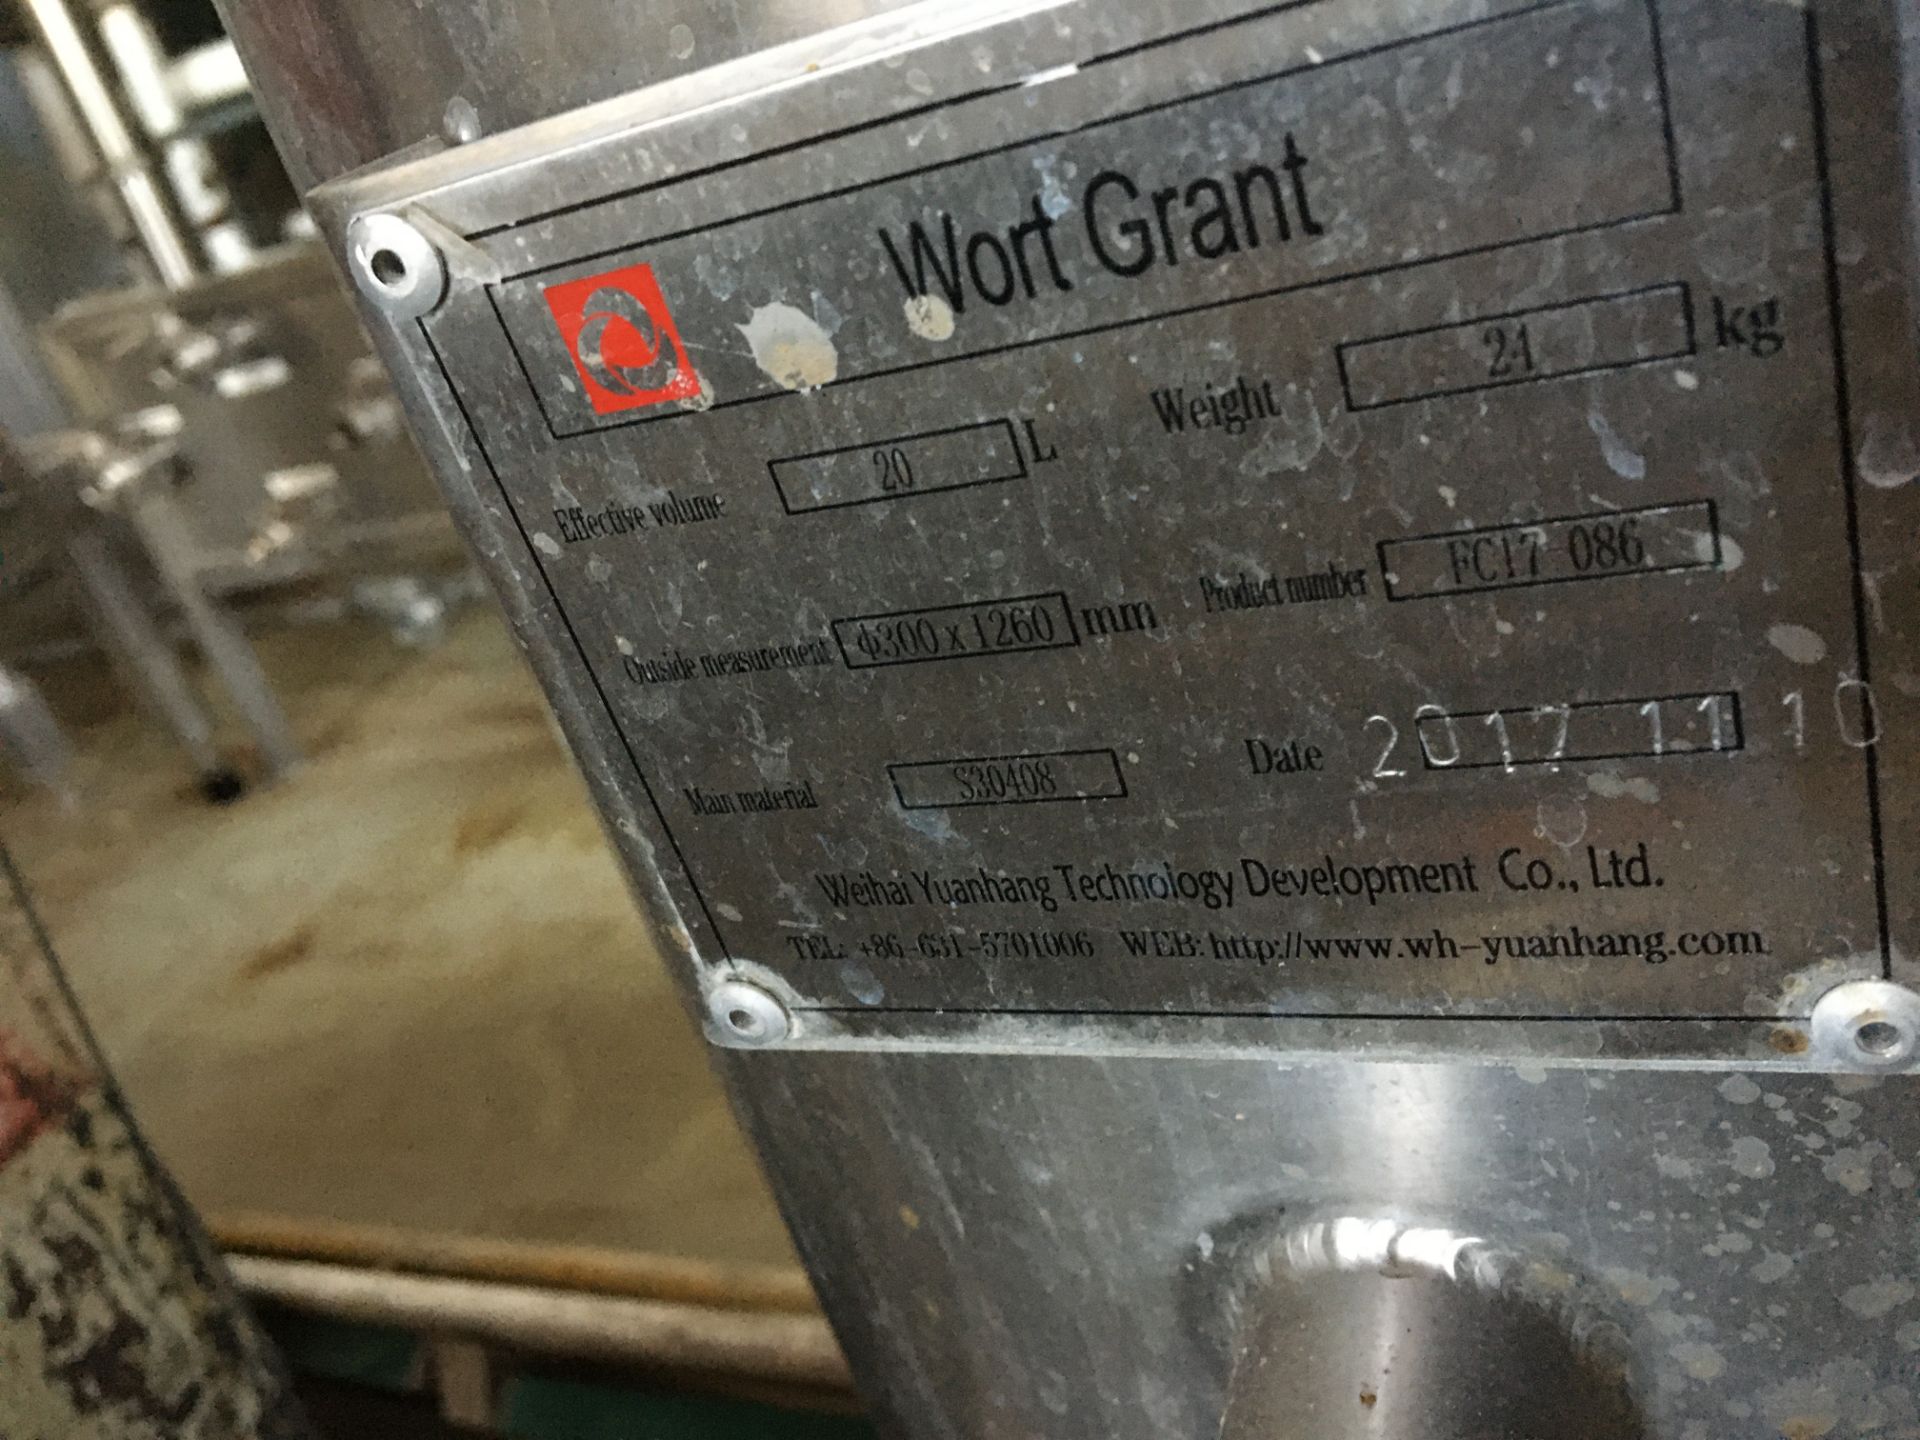 20-L Minnetonka Wort Grant, Stainless Steel; Vessel is a buffer tank between grain and wort (2017) - Image 8 of 10